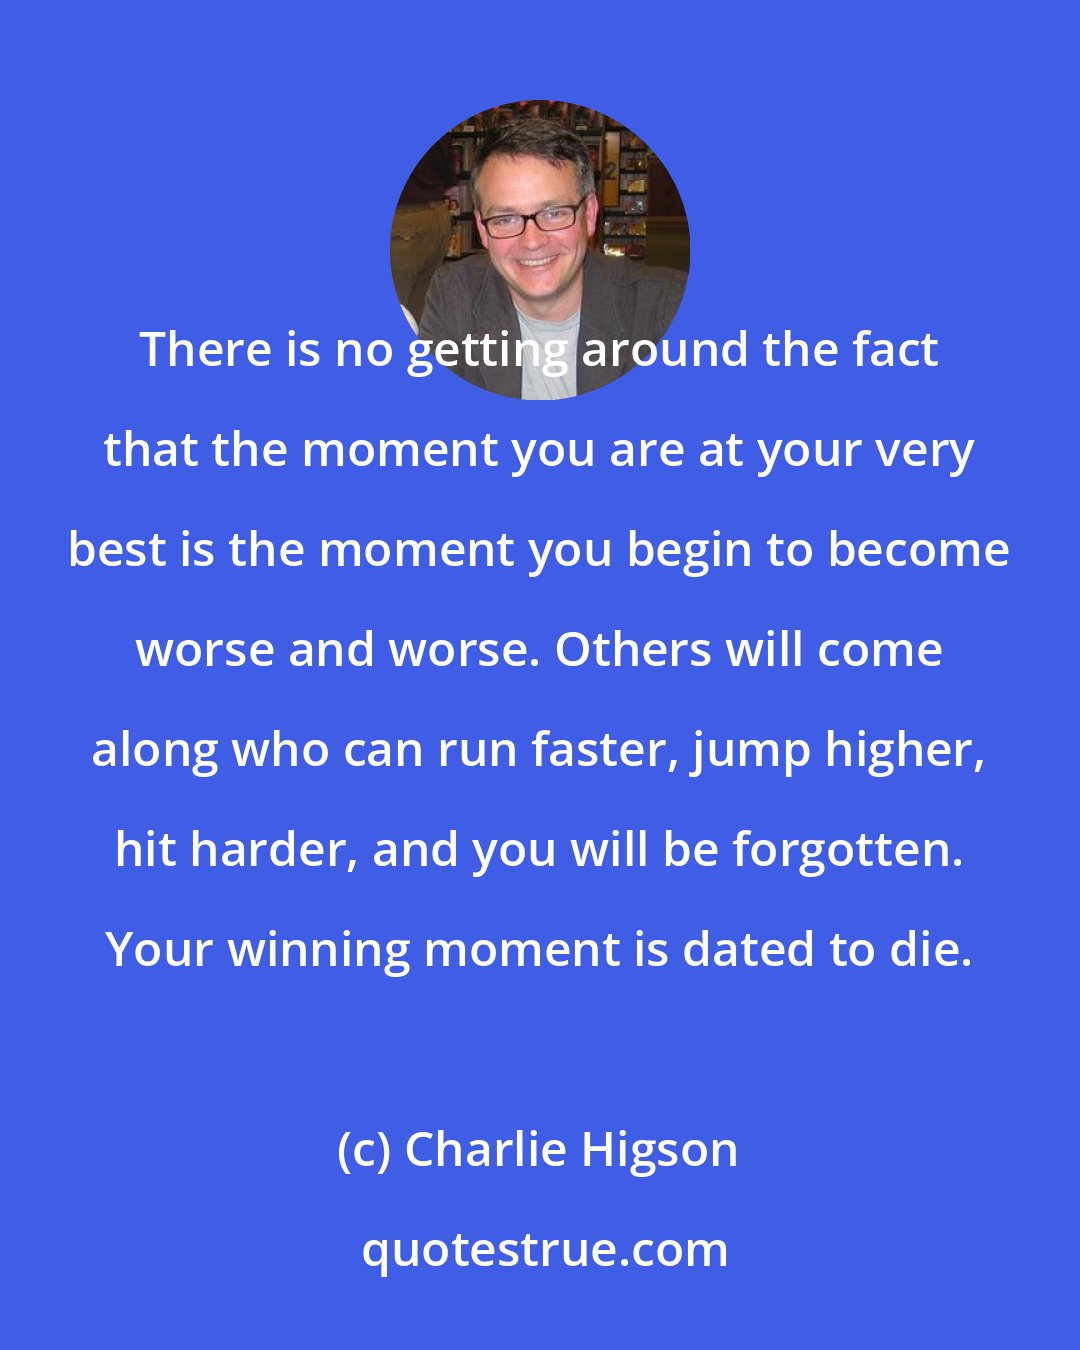 Charlie Higson: There is no getting around the fact that the moment you are at your very best is the moment you begin to become worse and worse. Others will come along who can run faster, jump higher, hit harder, and you will be forgotten. Your winning moment is dated to die.